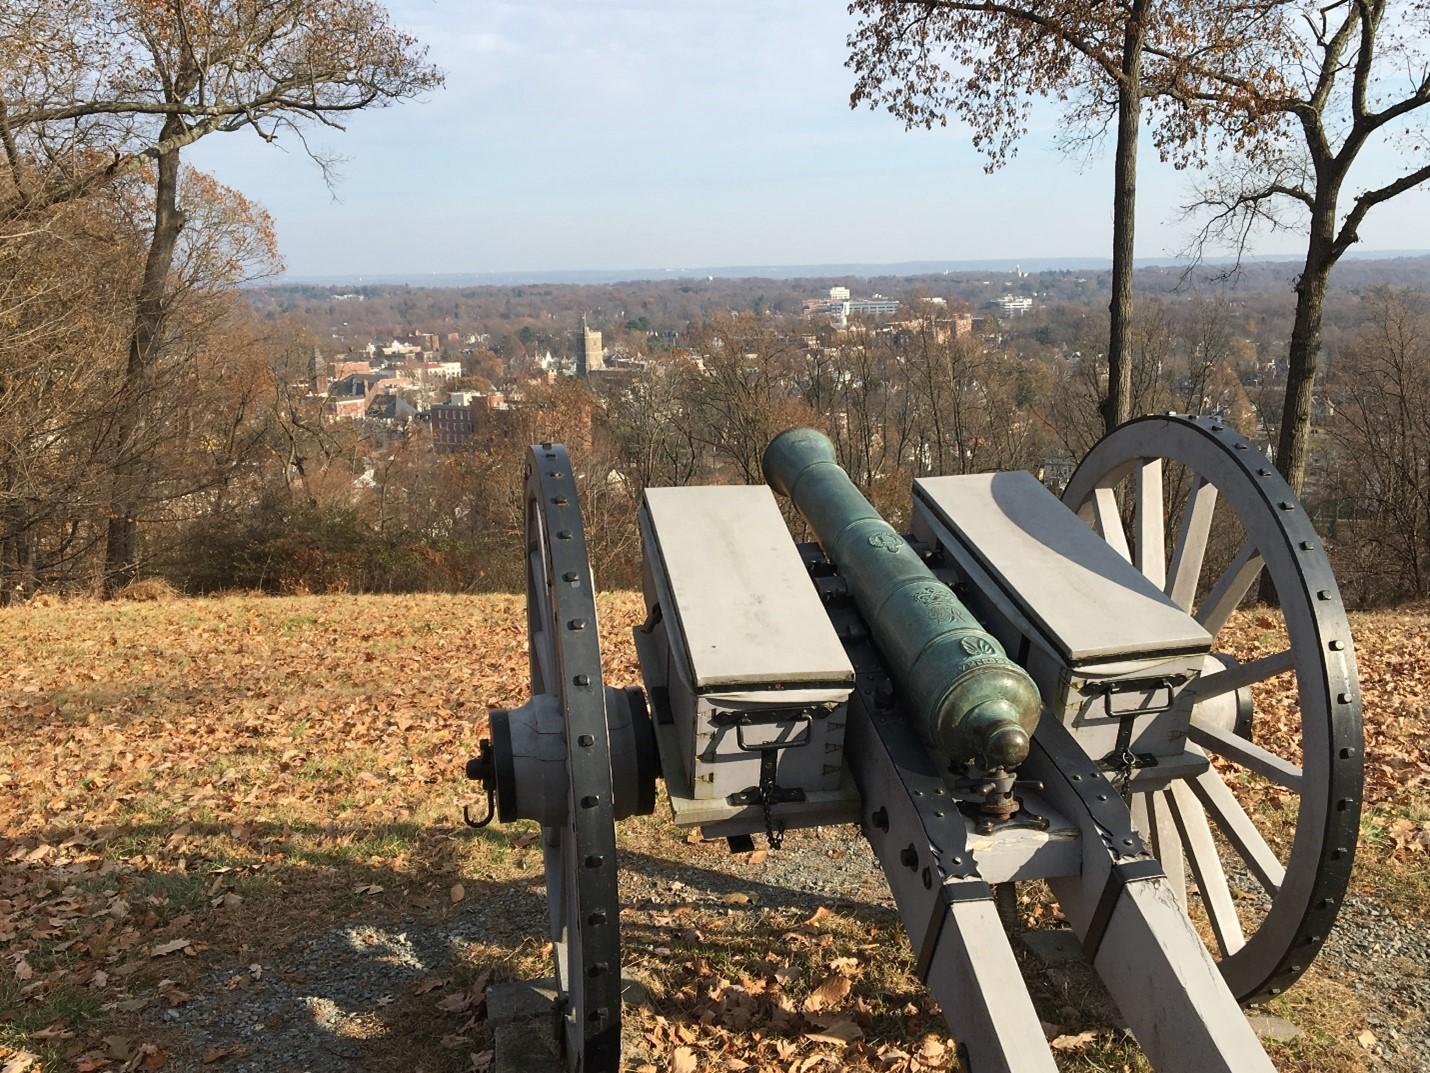 Overlook with cannon in foreground